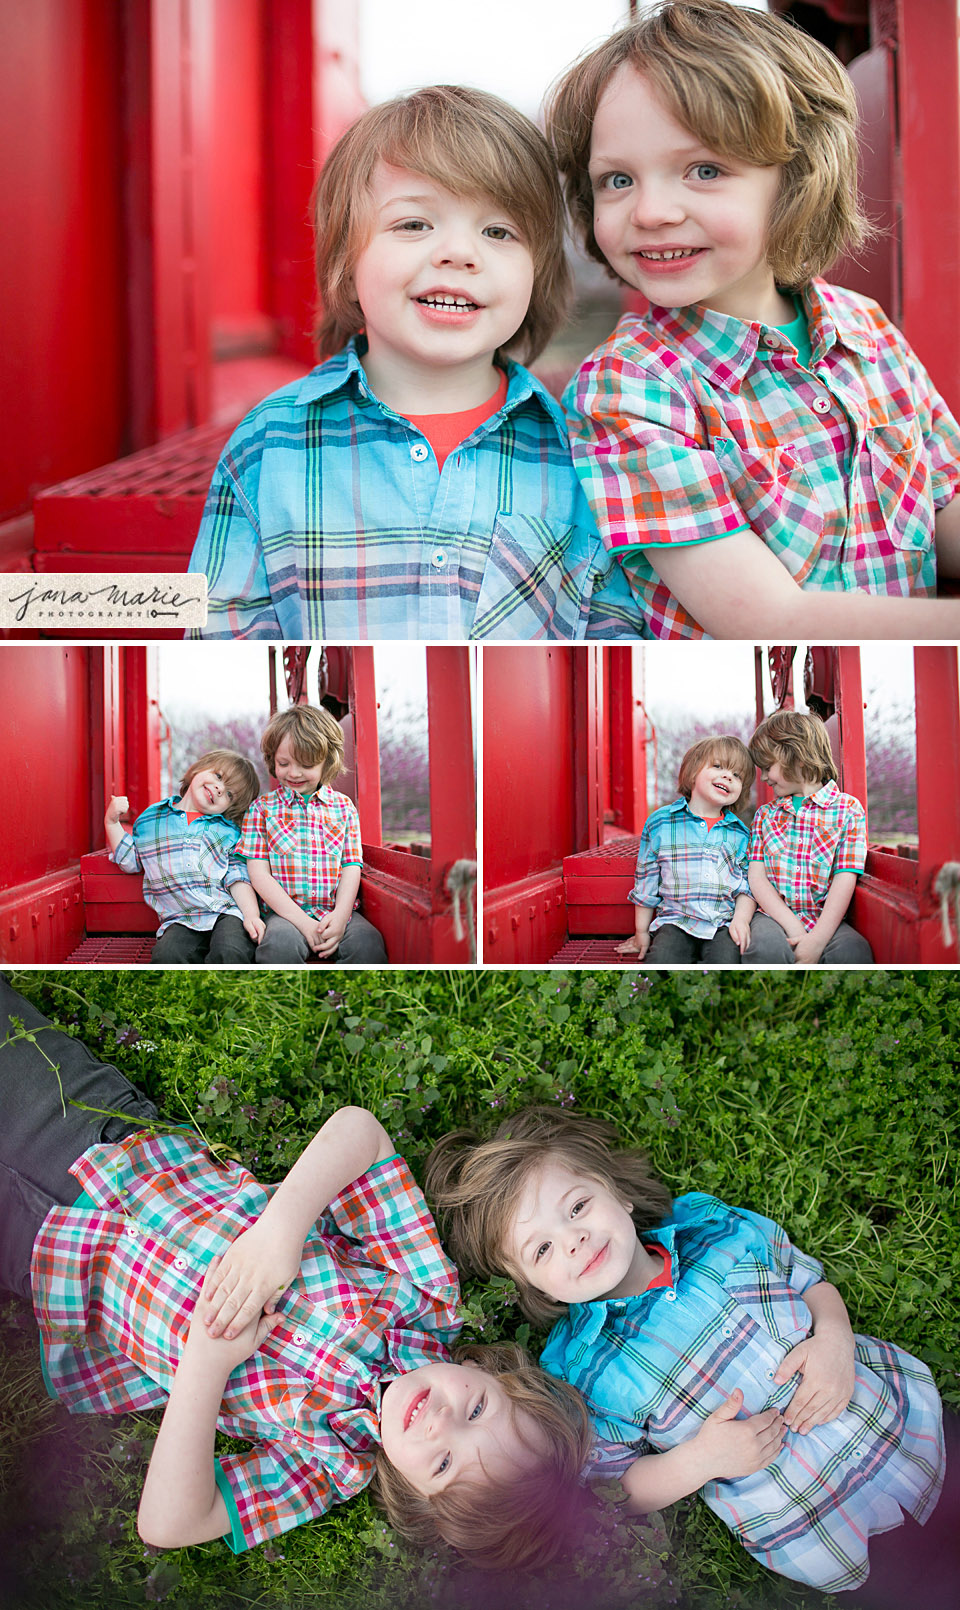 Jana Marie Photography, Independence square, Red trains, children photography